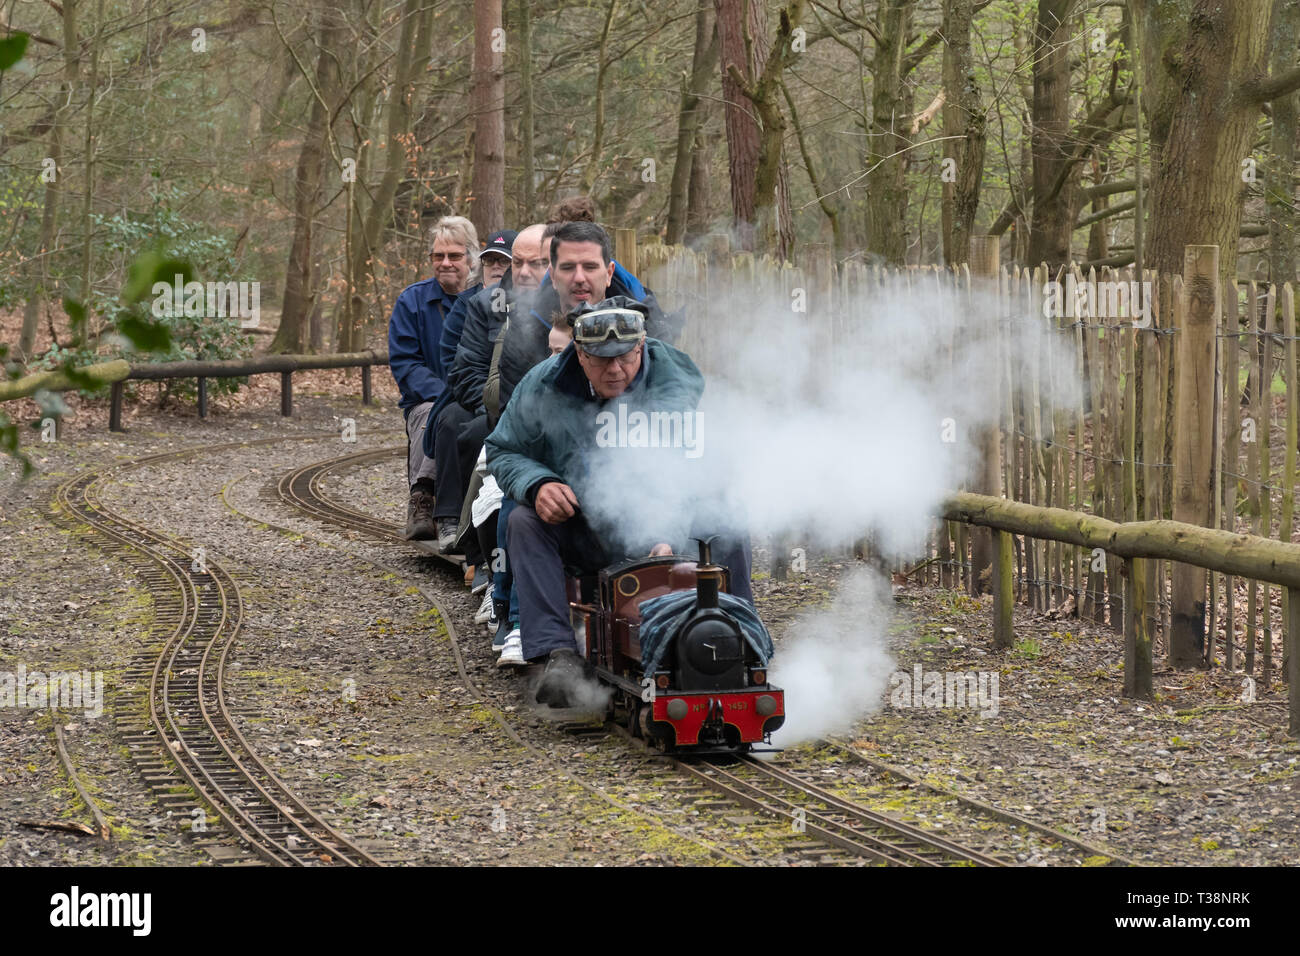 Families enjoying rides on the miniature steam trains and railway at Frimley Lodge Park, Frimley, Surrey, UK Stock Photo